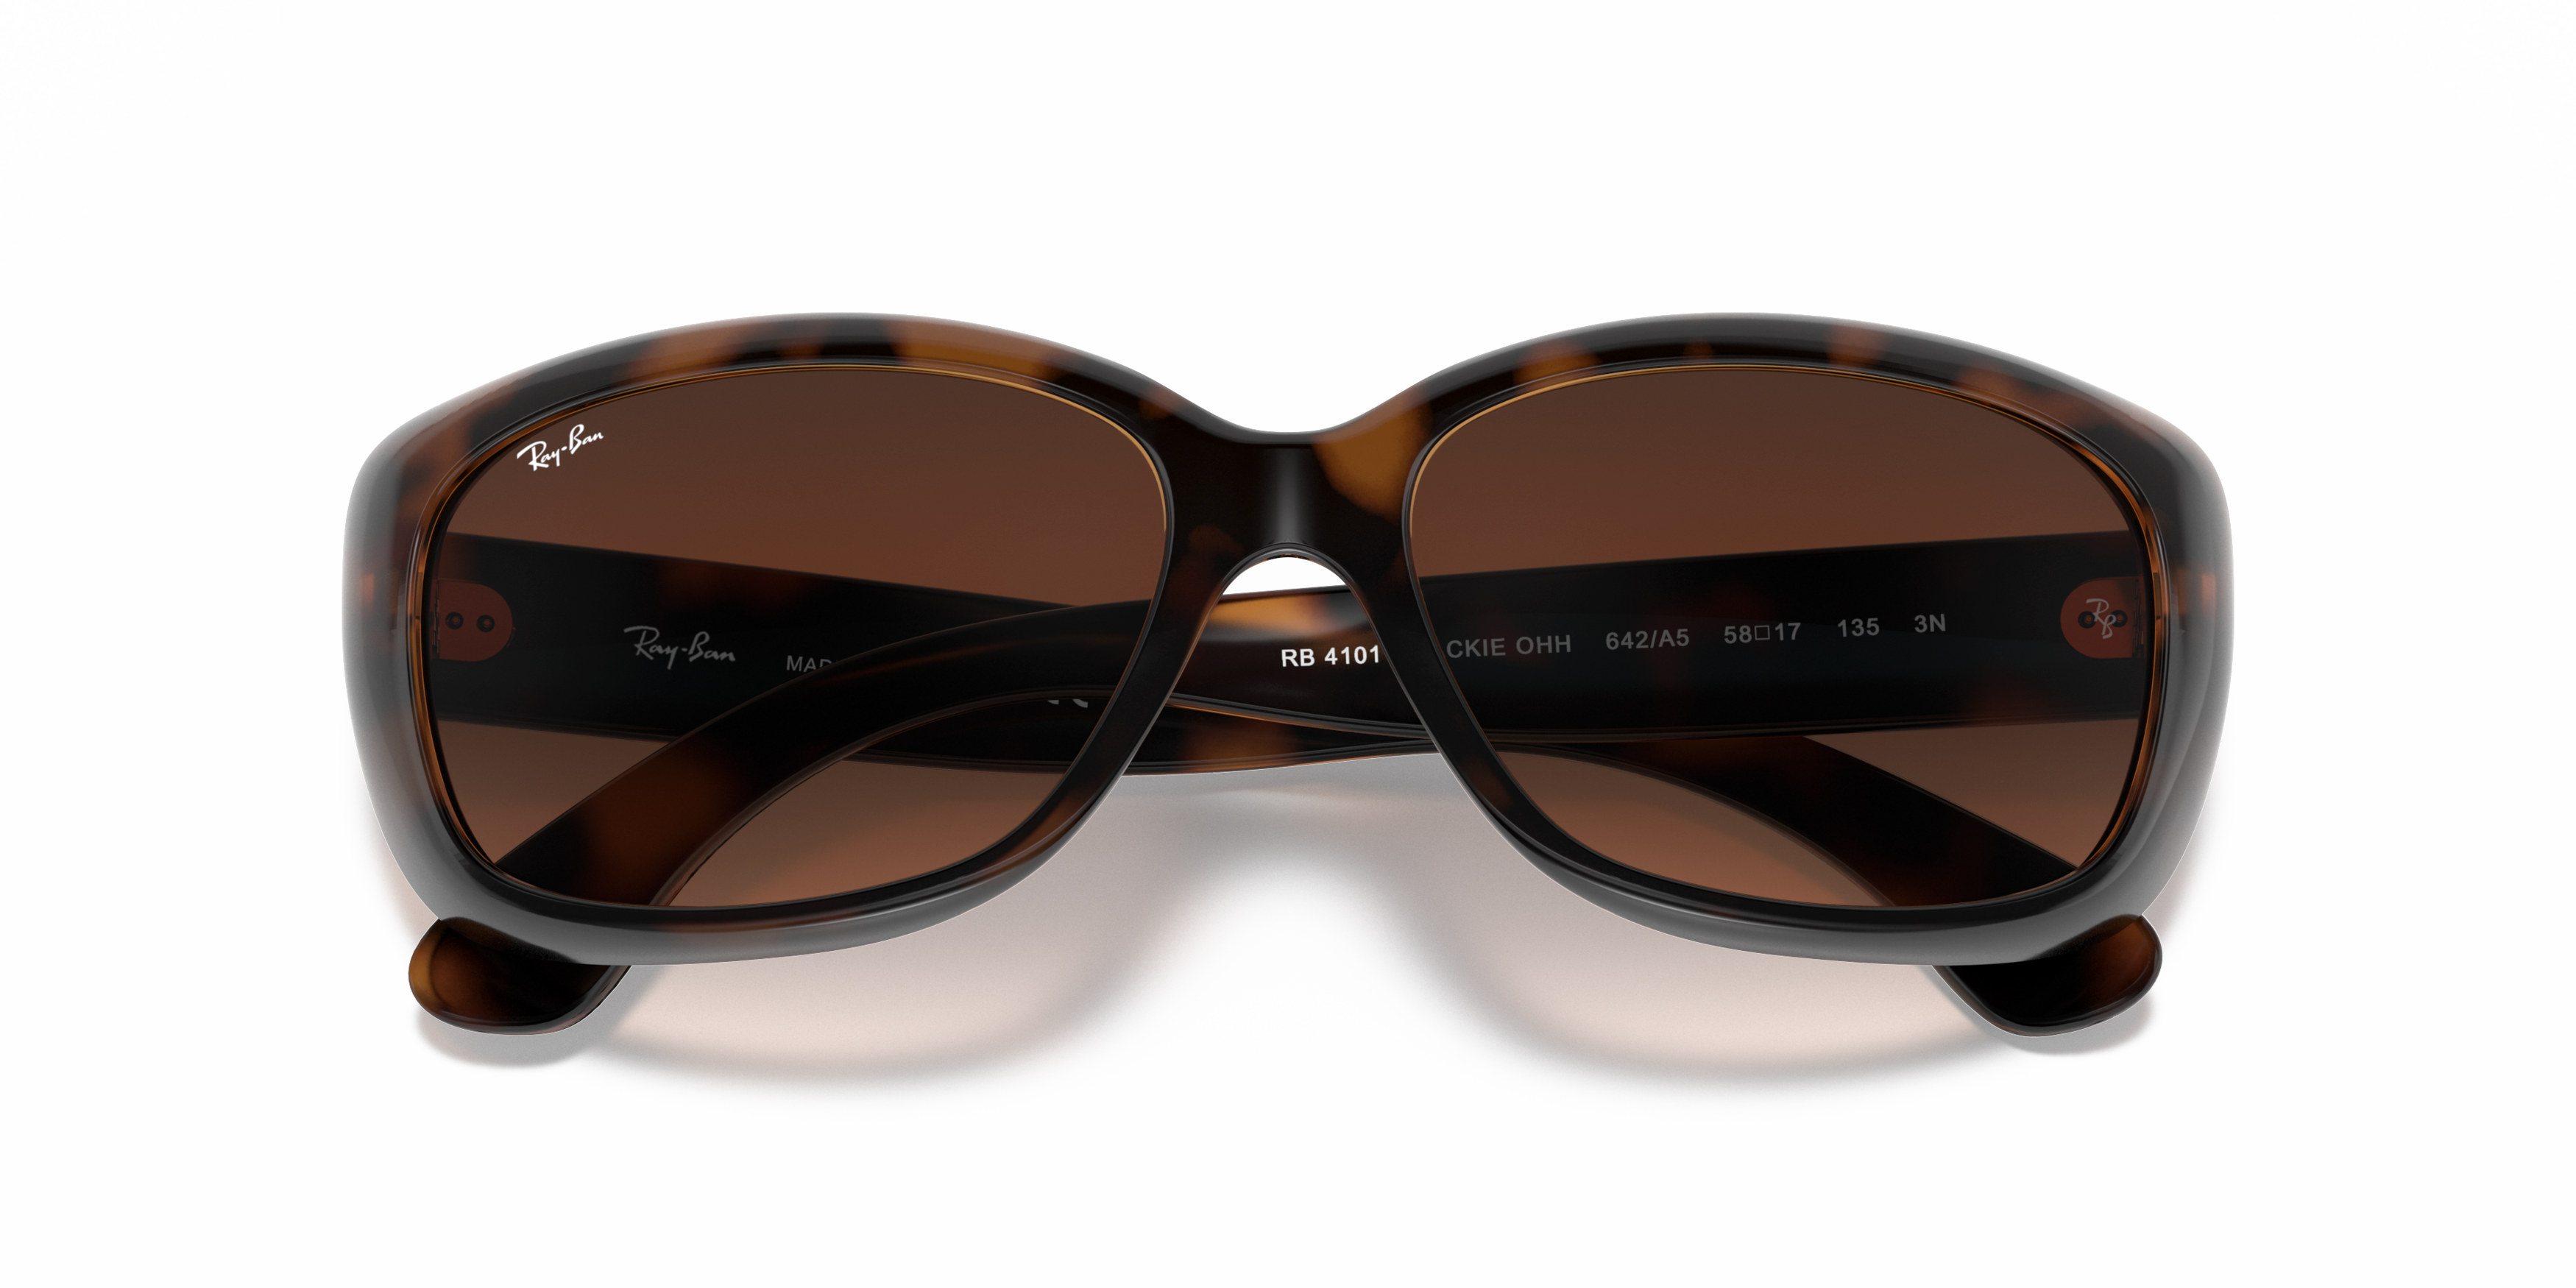 Folded Ray-Ban Jackie Ohh RB 4101 Sunglasses Brown / Tortoise Shell